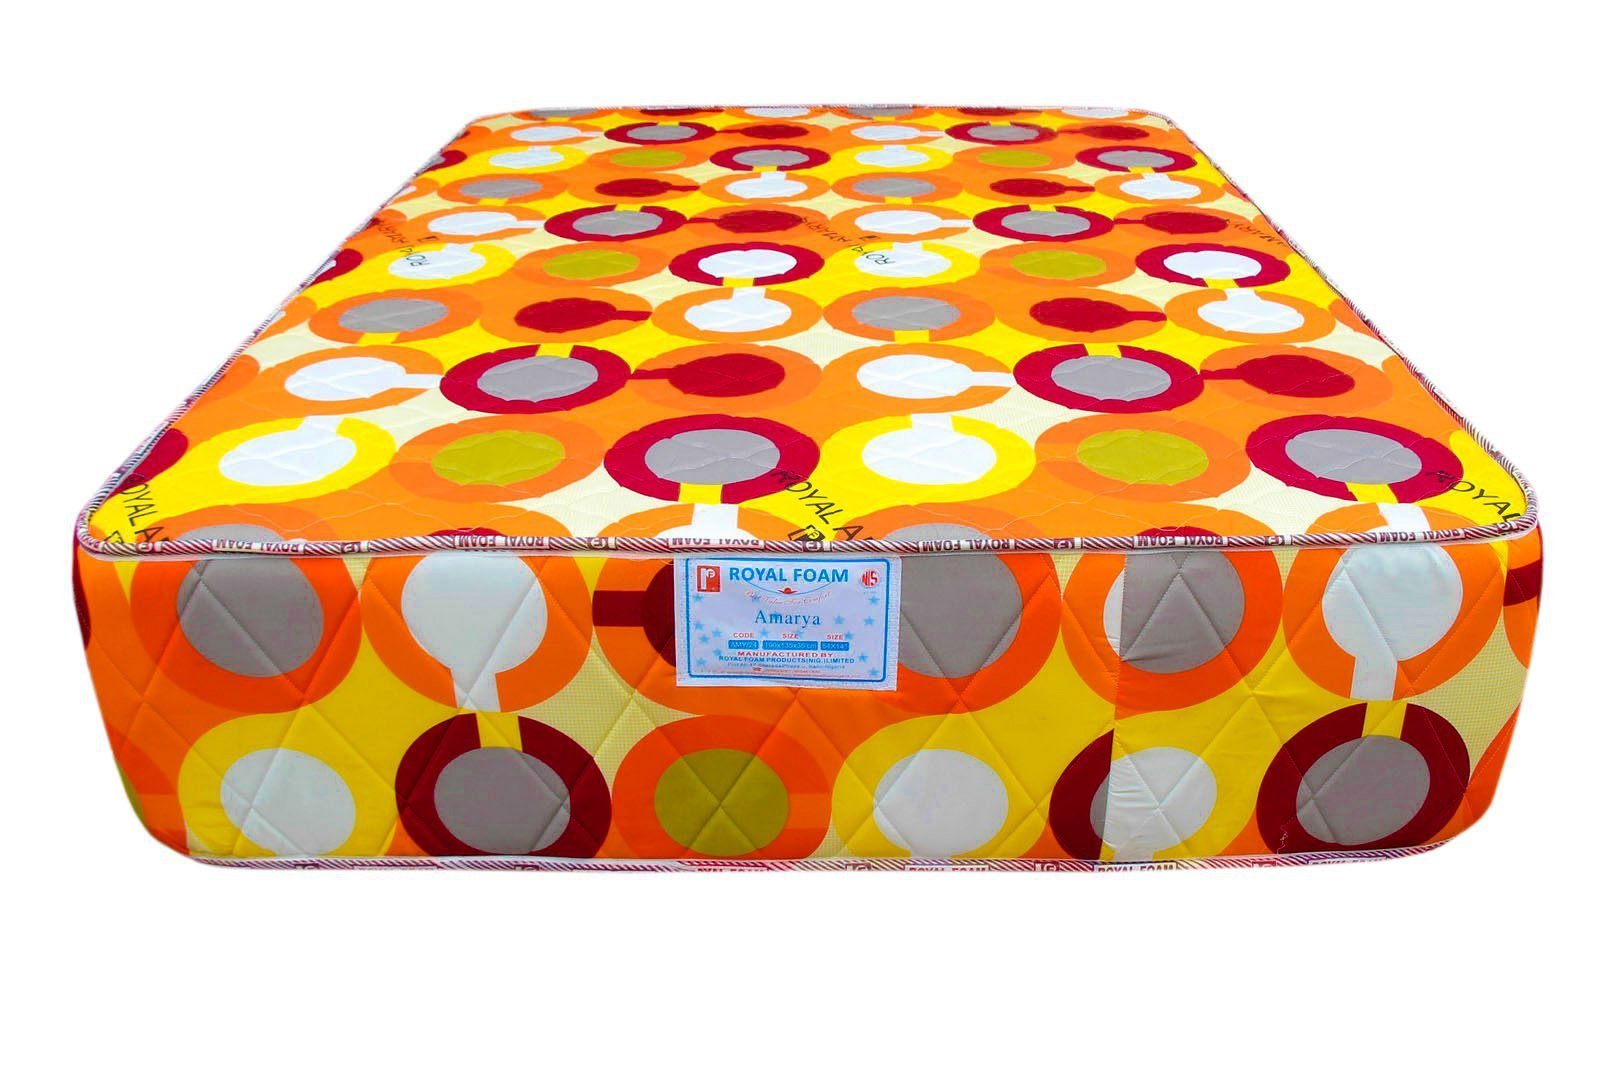 Royal Amarya-Poly Cotton Fabric - 14 Density foam - Fully Quilted Mattress -190X120X25CM [75 X 48 X 10] [6ft X 4ft X 10inches]